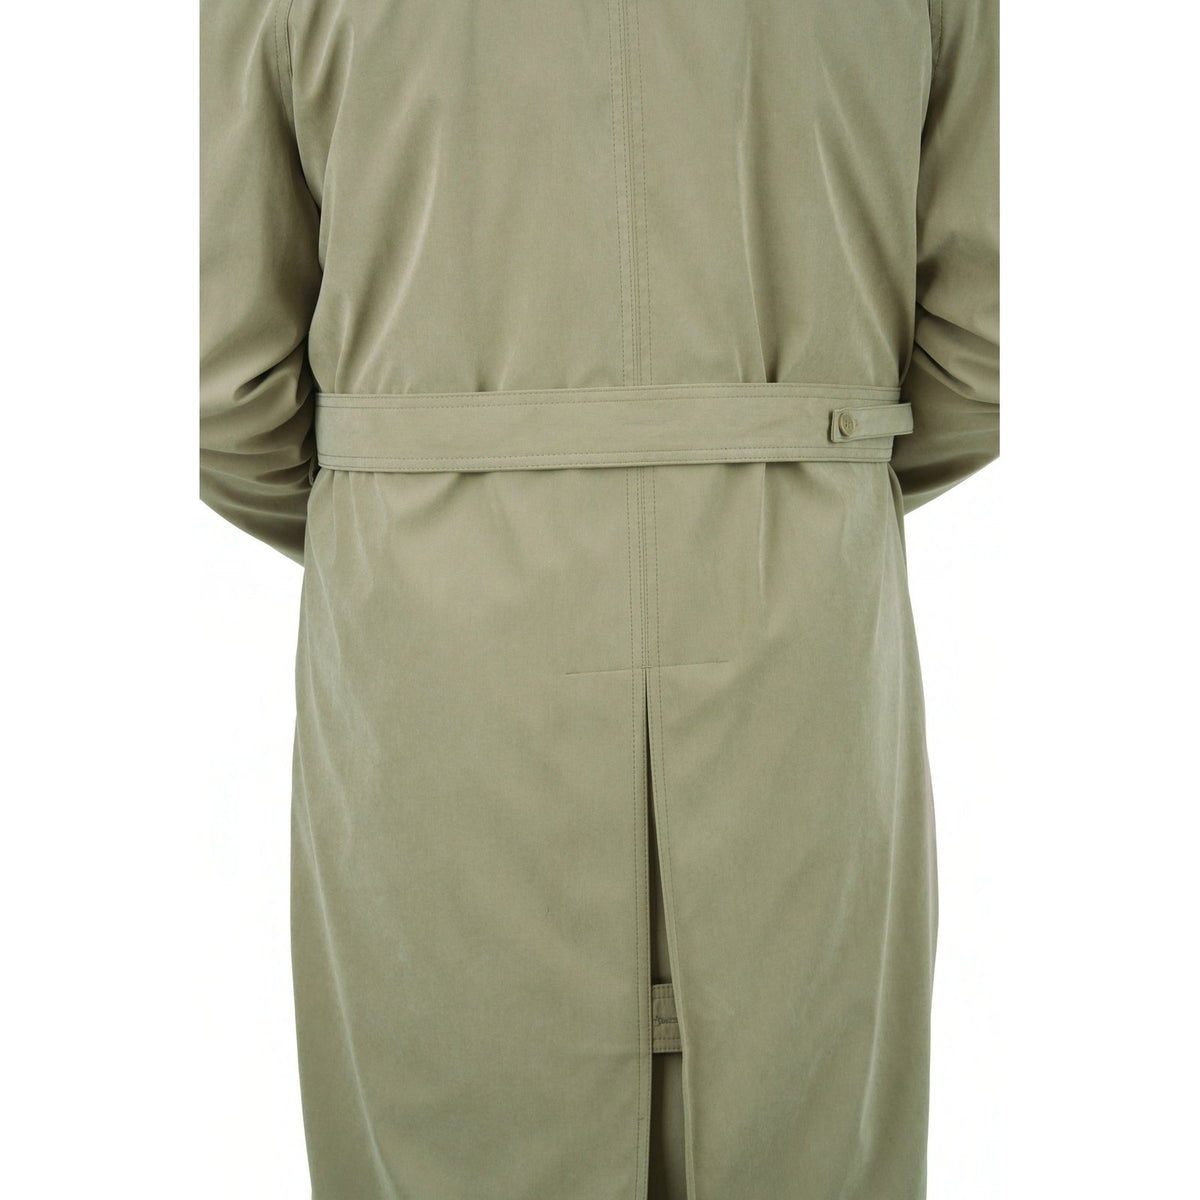 Cianni Cellini OUTERWEAR Men&#39;s Single Breasted Beige Long Trench Coat Jacket With Removable Belt &amp; Liner